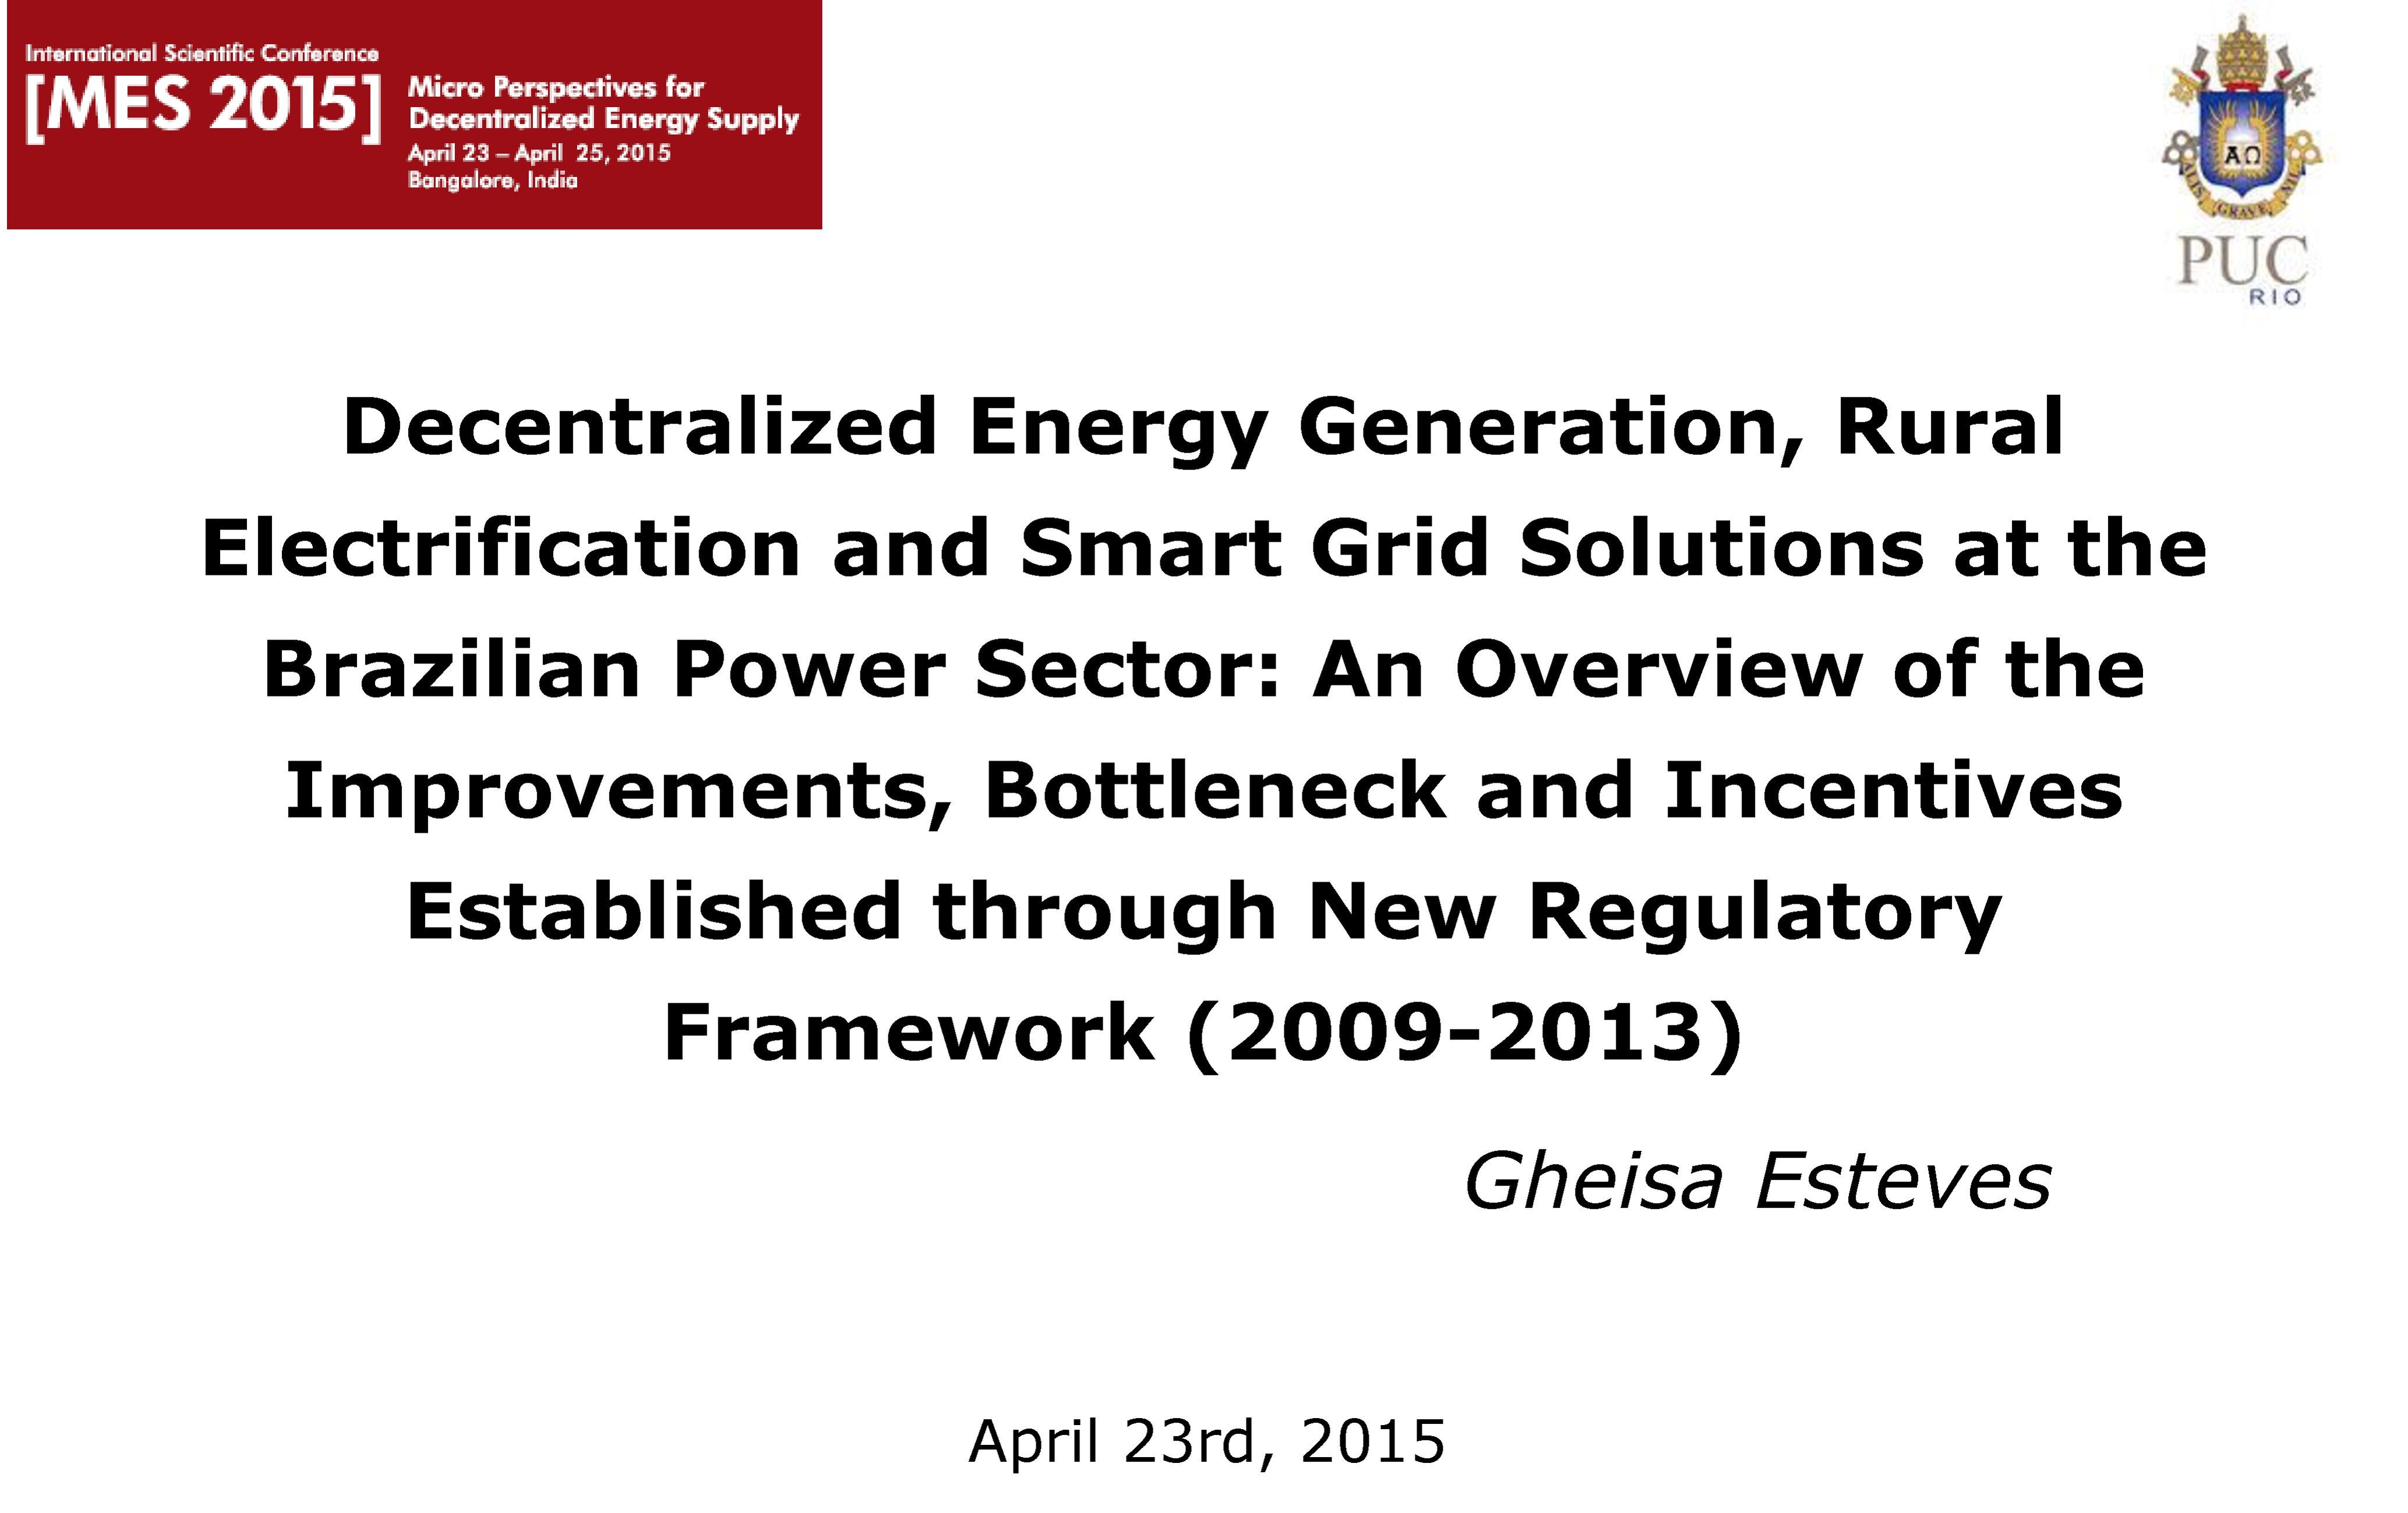 Decentralized Energy Generation, Rural Electrification and Smart Grid Solutions at the Brazilian Power Sector: An Overview of the Improvements, Bottle neck and Incentives Established through New Regulatory Framework 2009/2011